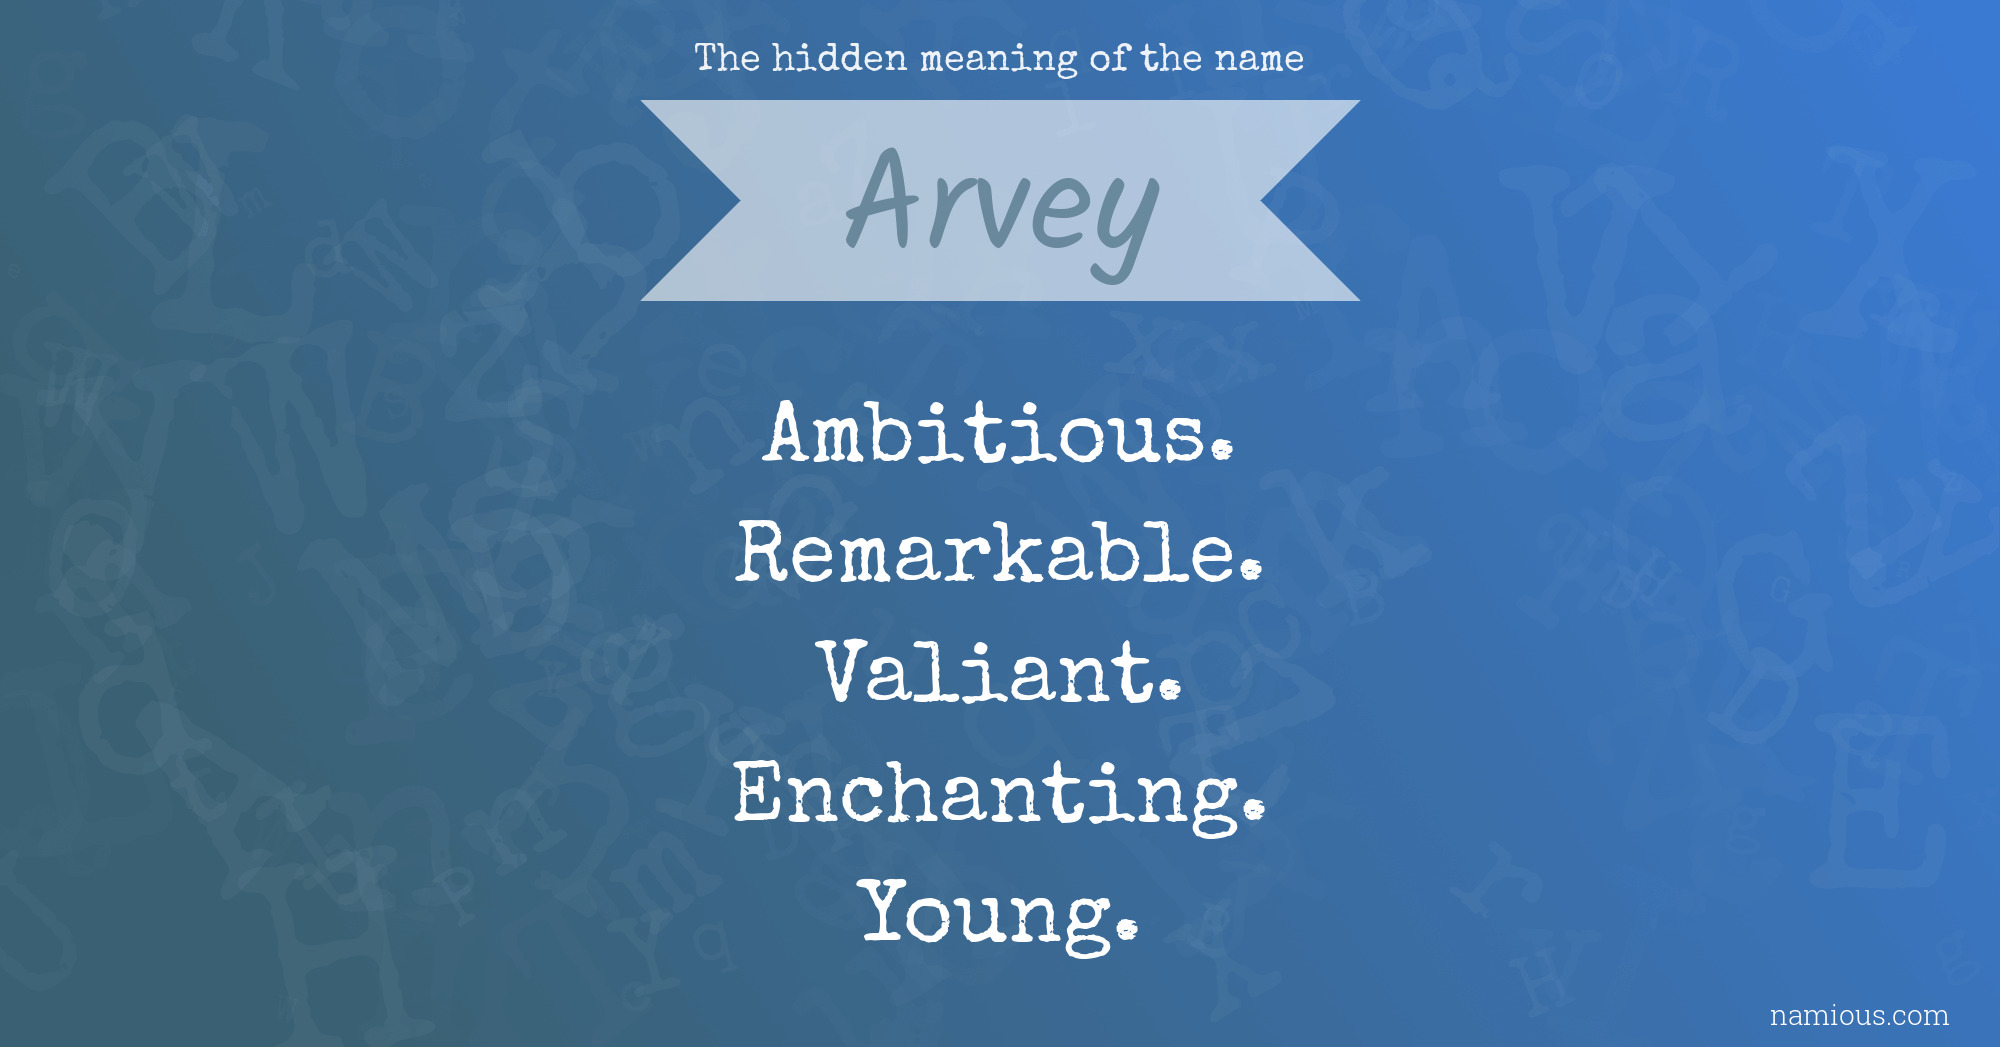 The hidden meaning of the name Arvey